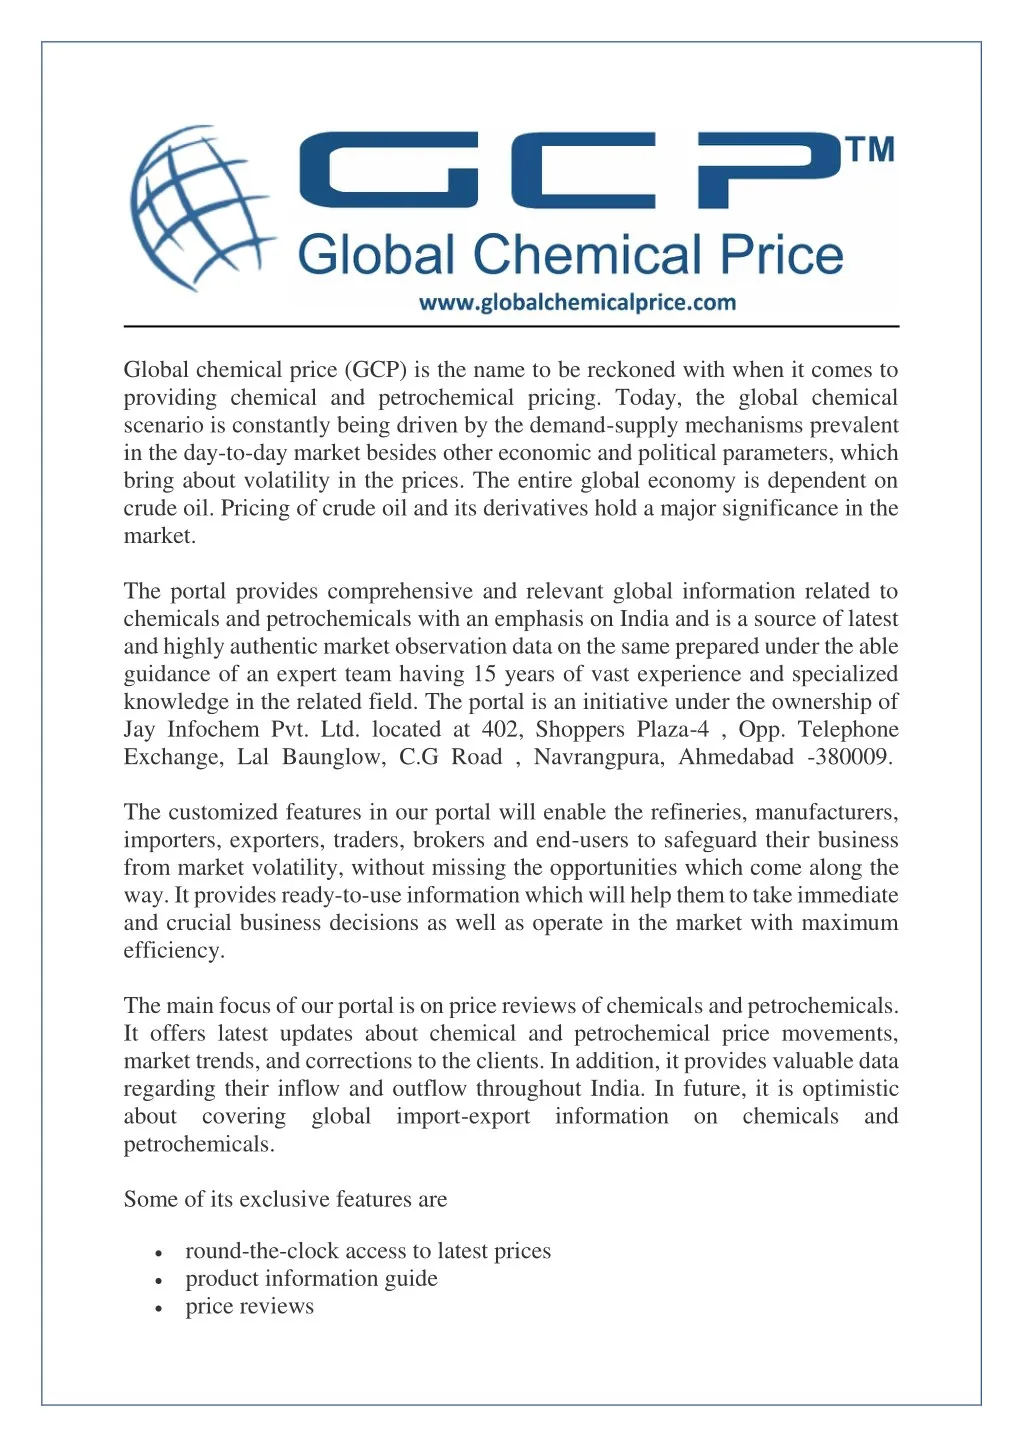 global chemical price gcp is the name